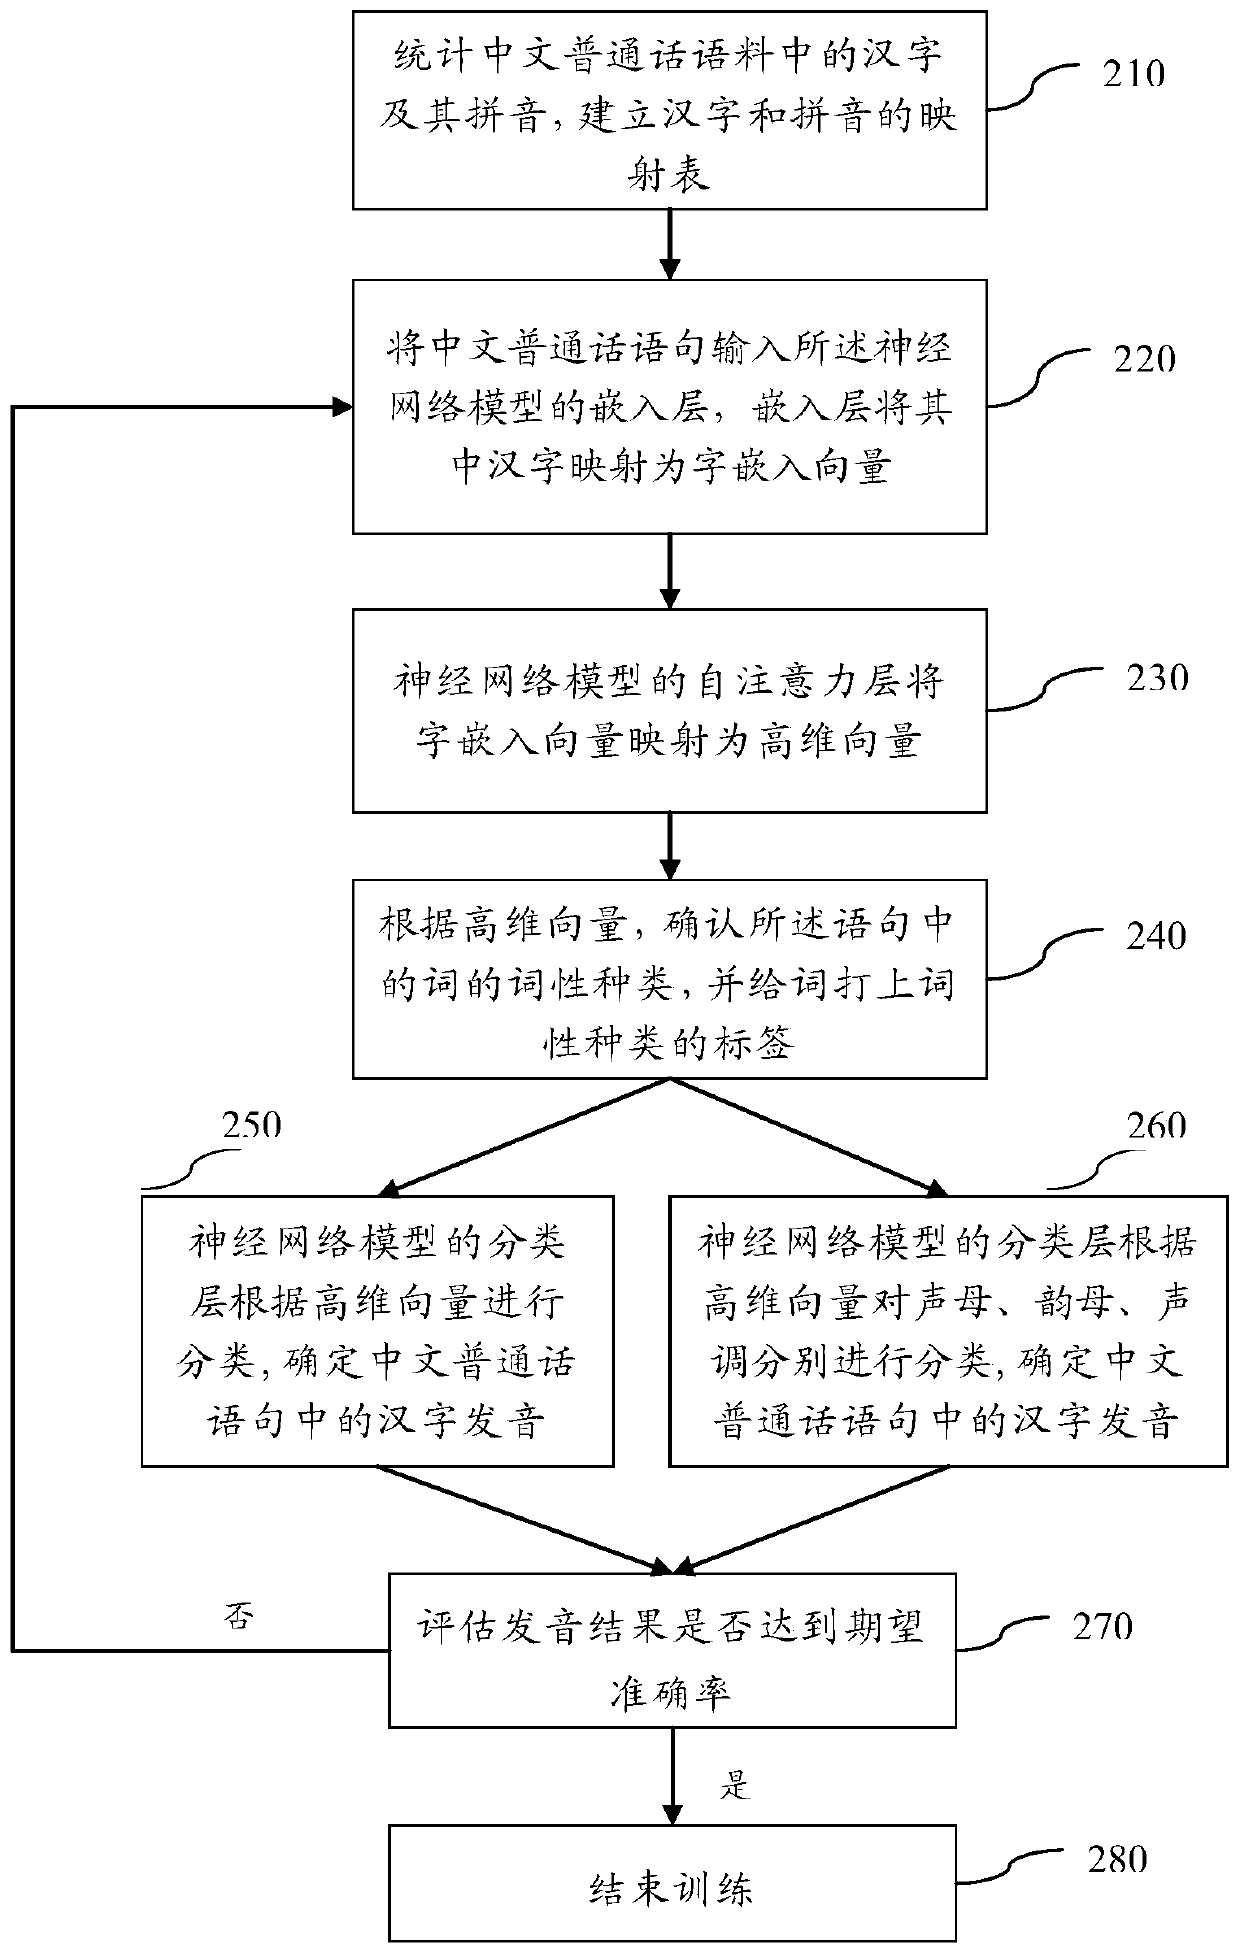 Chinese mandarin character pronunciation conversion method based on self-attention mechanism